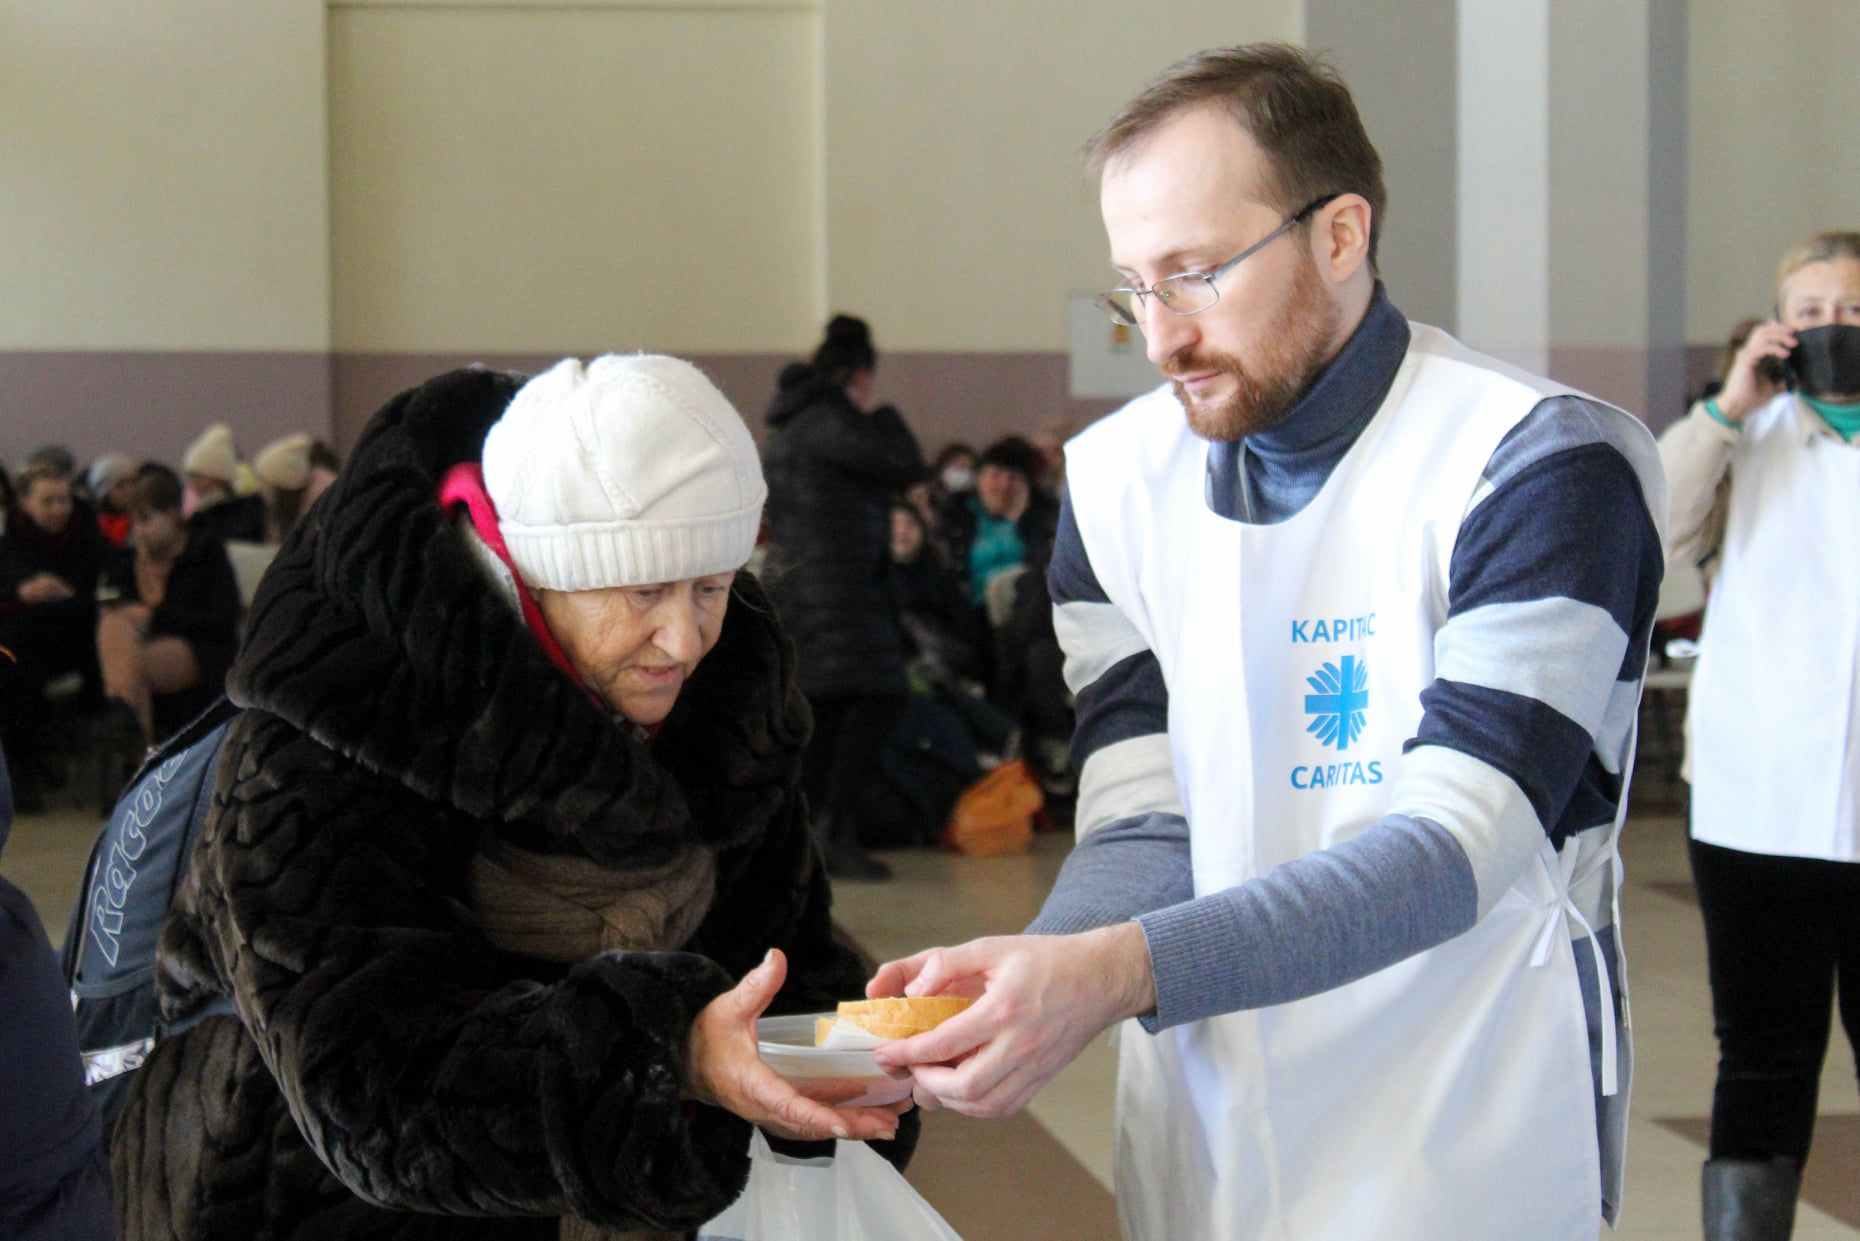 An elderly woman is given slices of bread by a volunteer in Caritas Ukraine.